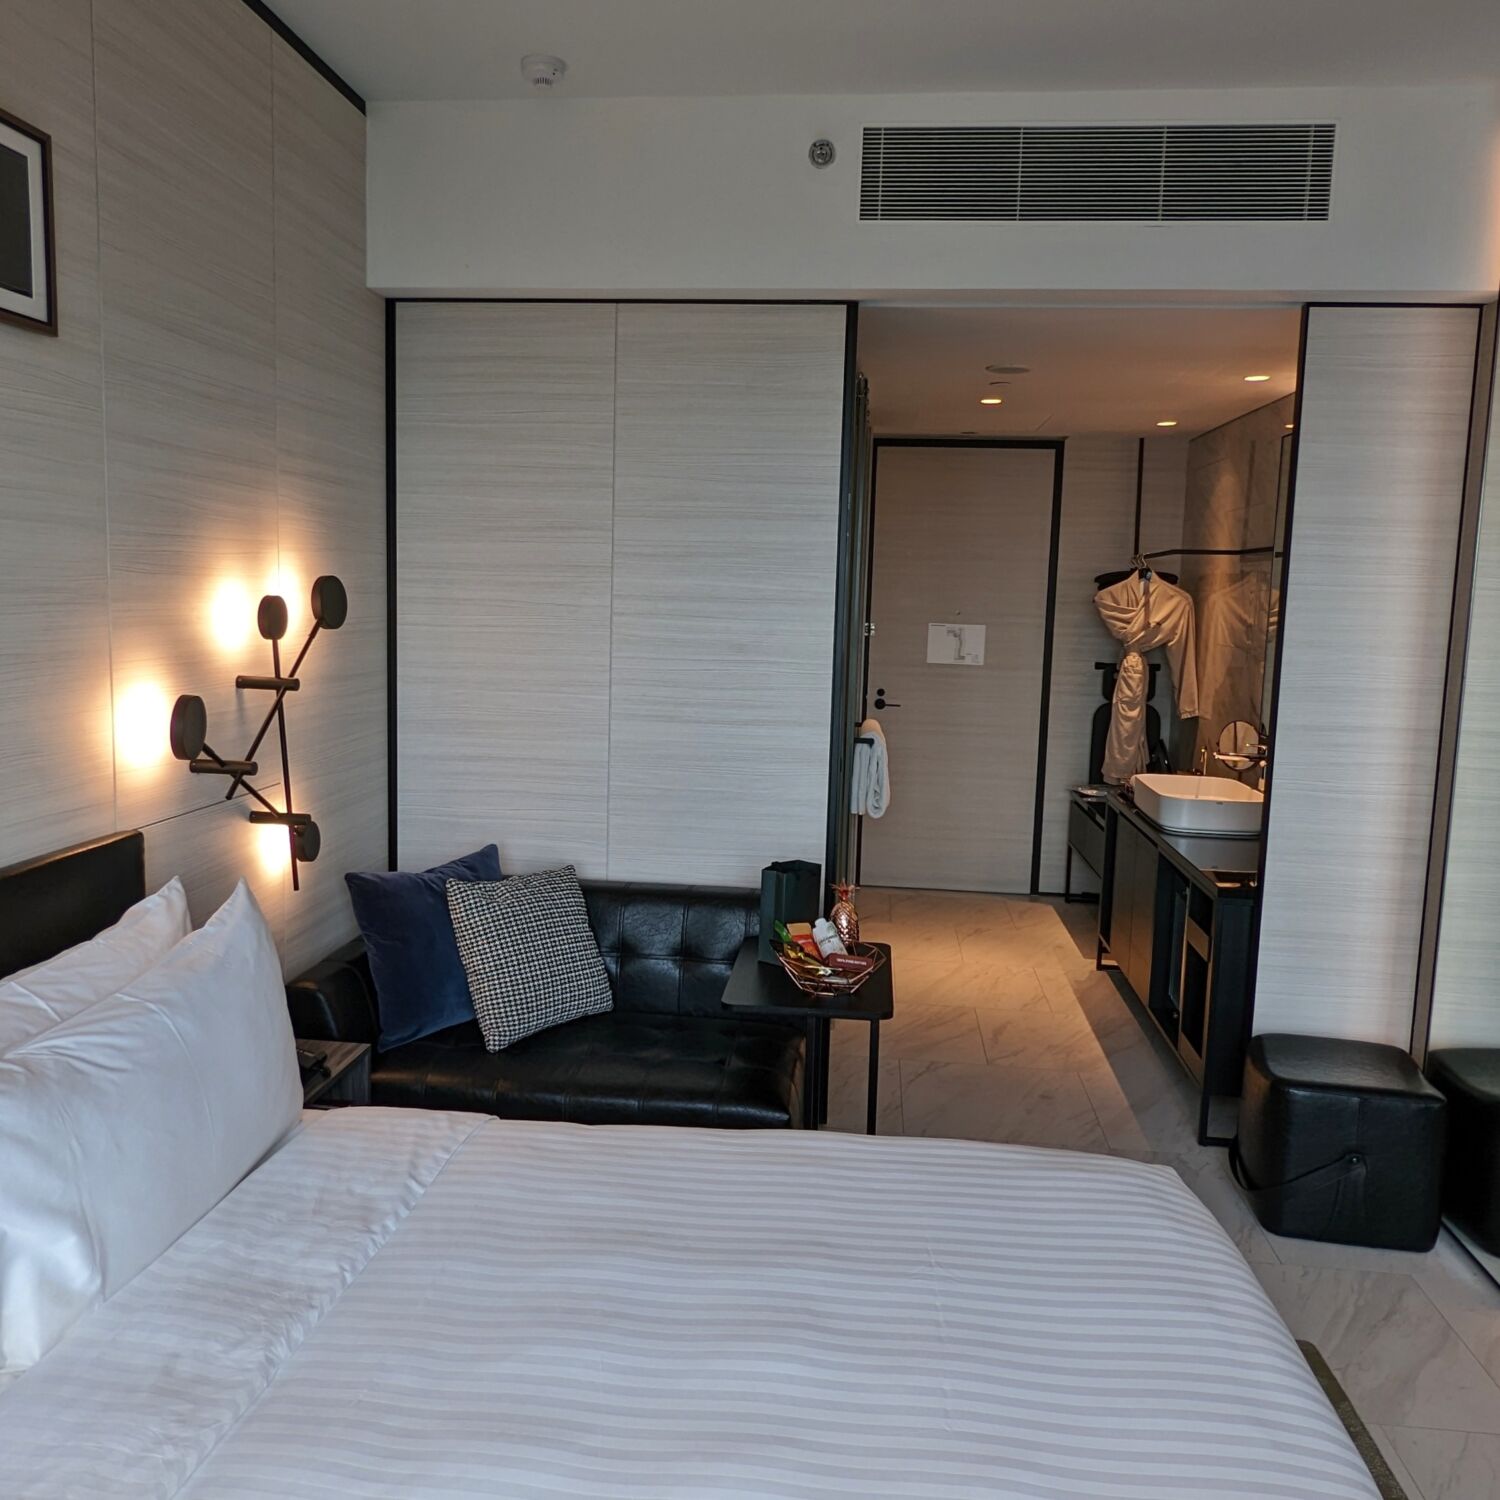 The Outpost Hotel Sentosa Singapore Deluxe Room Sea View